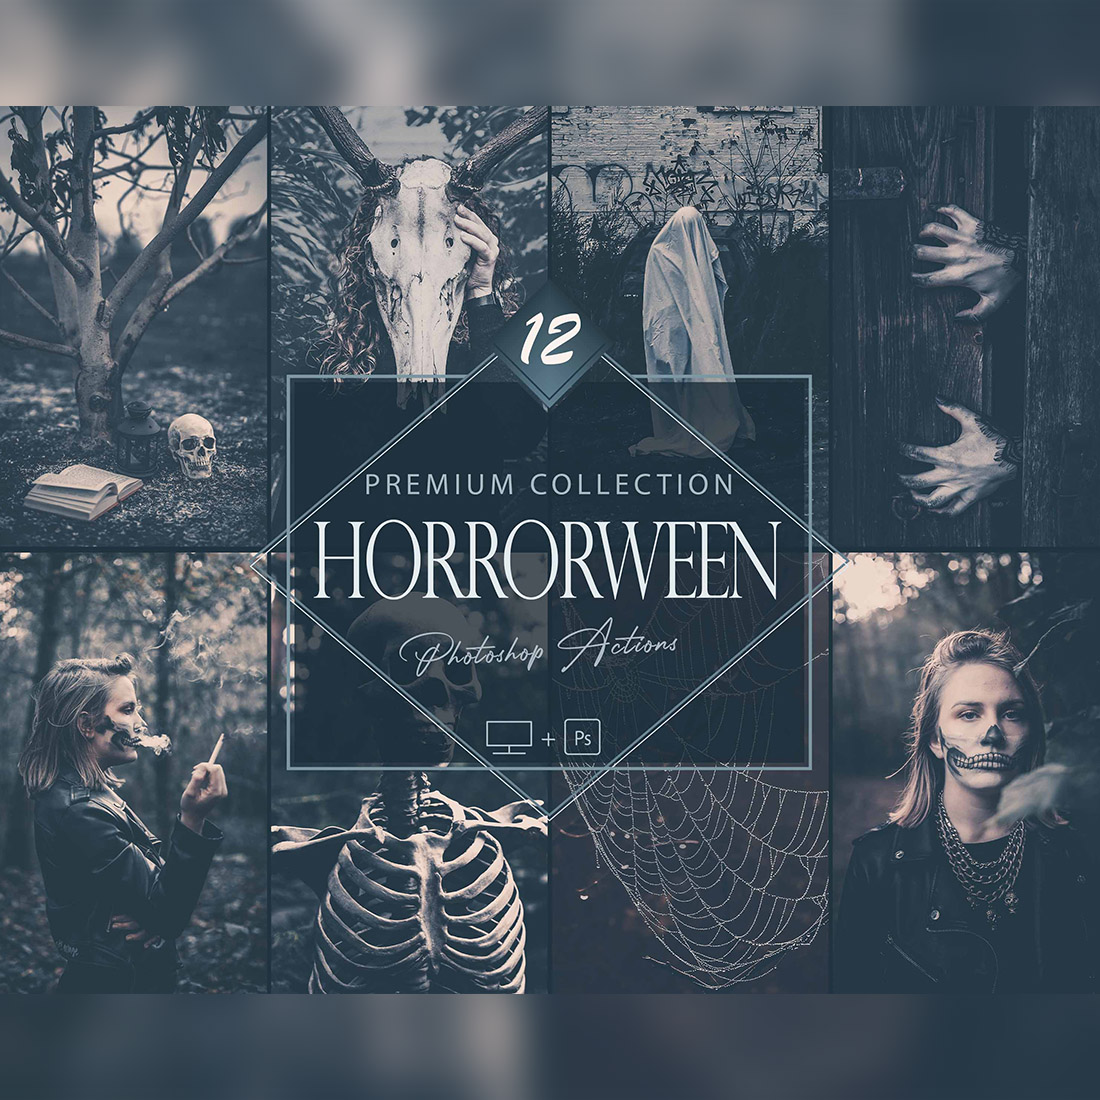 12 Horrorween Photoshop Actions, Moody Halloween ACR Preset, Dark Horror Ps Filter, Portrait And Lifestyle Theme For Instagram, Blogger cover image.